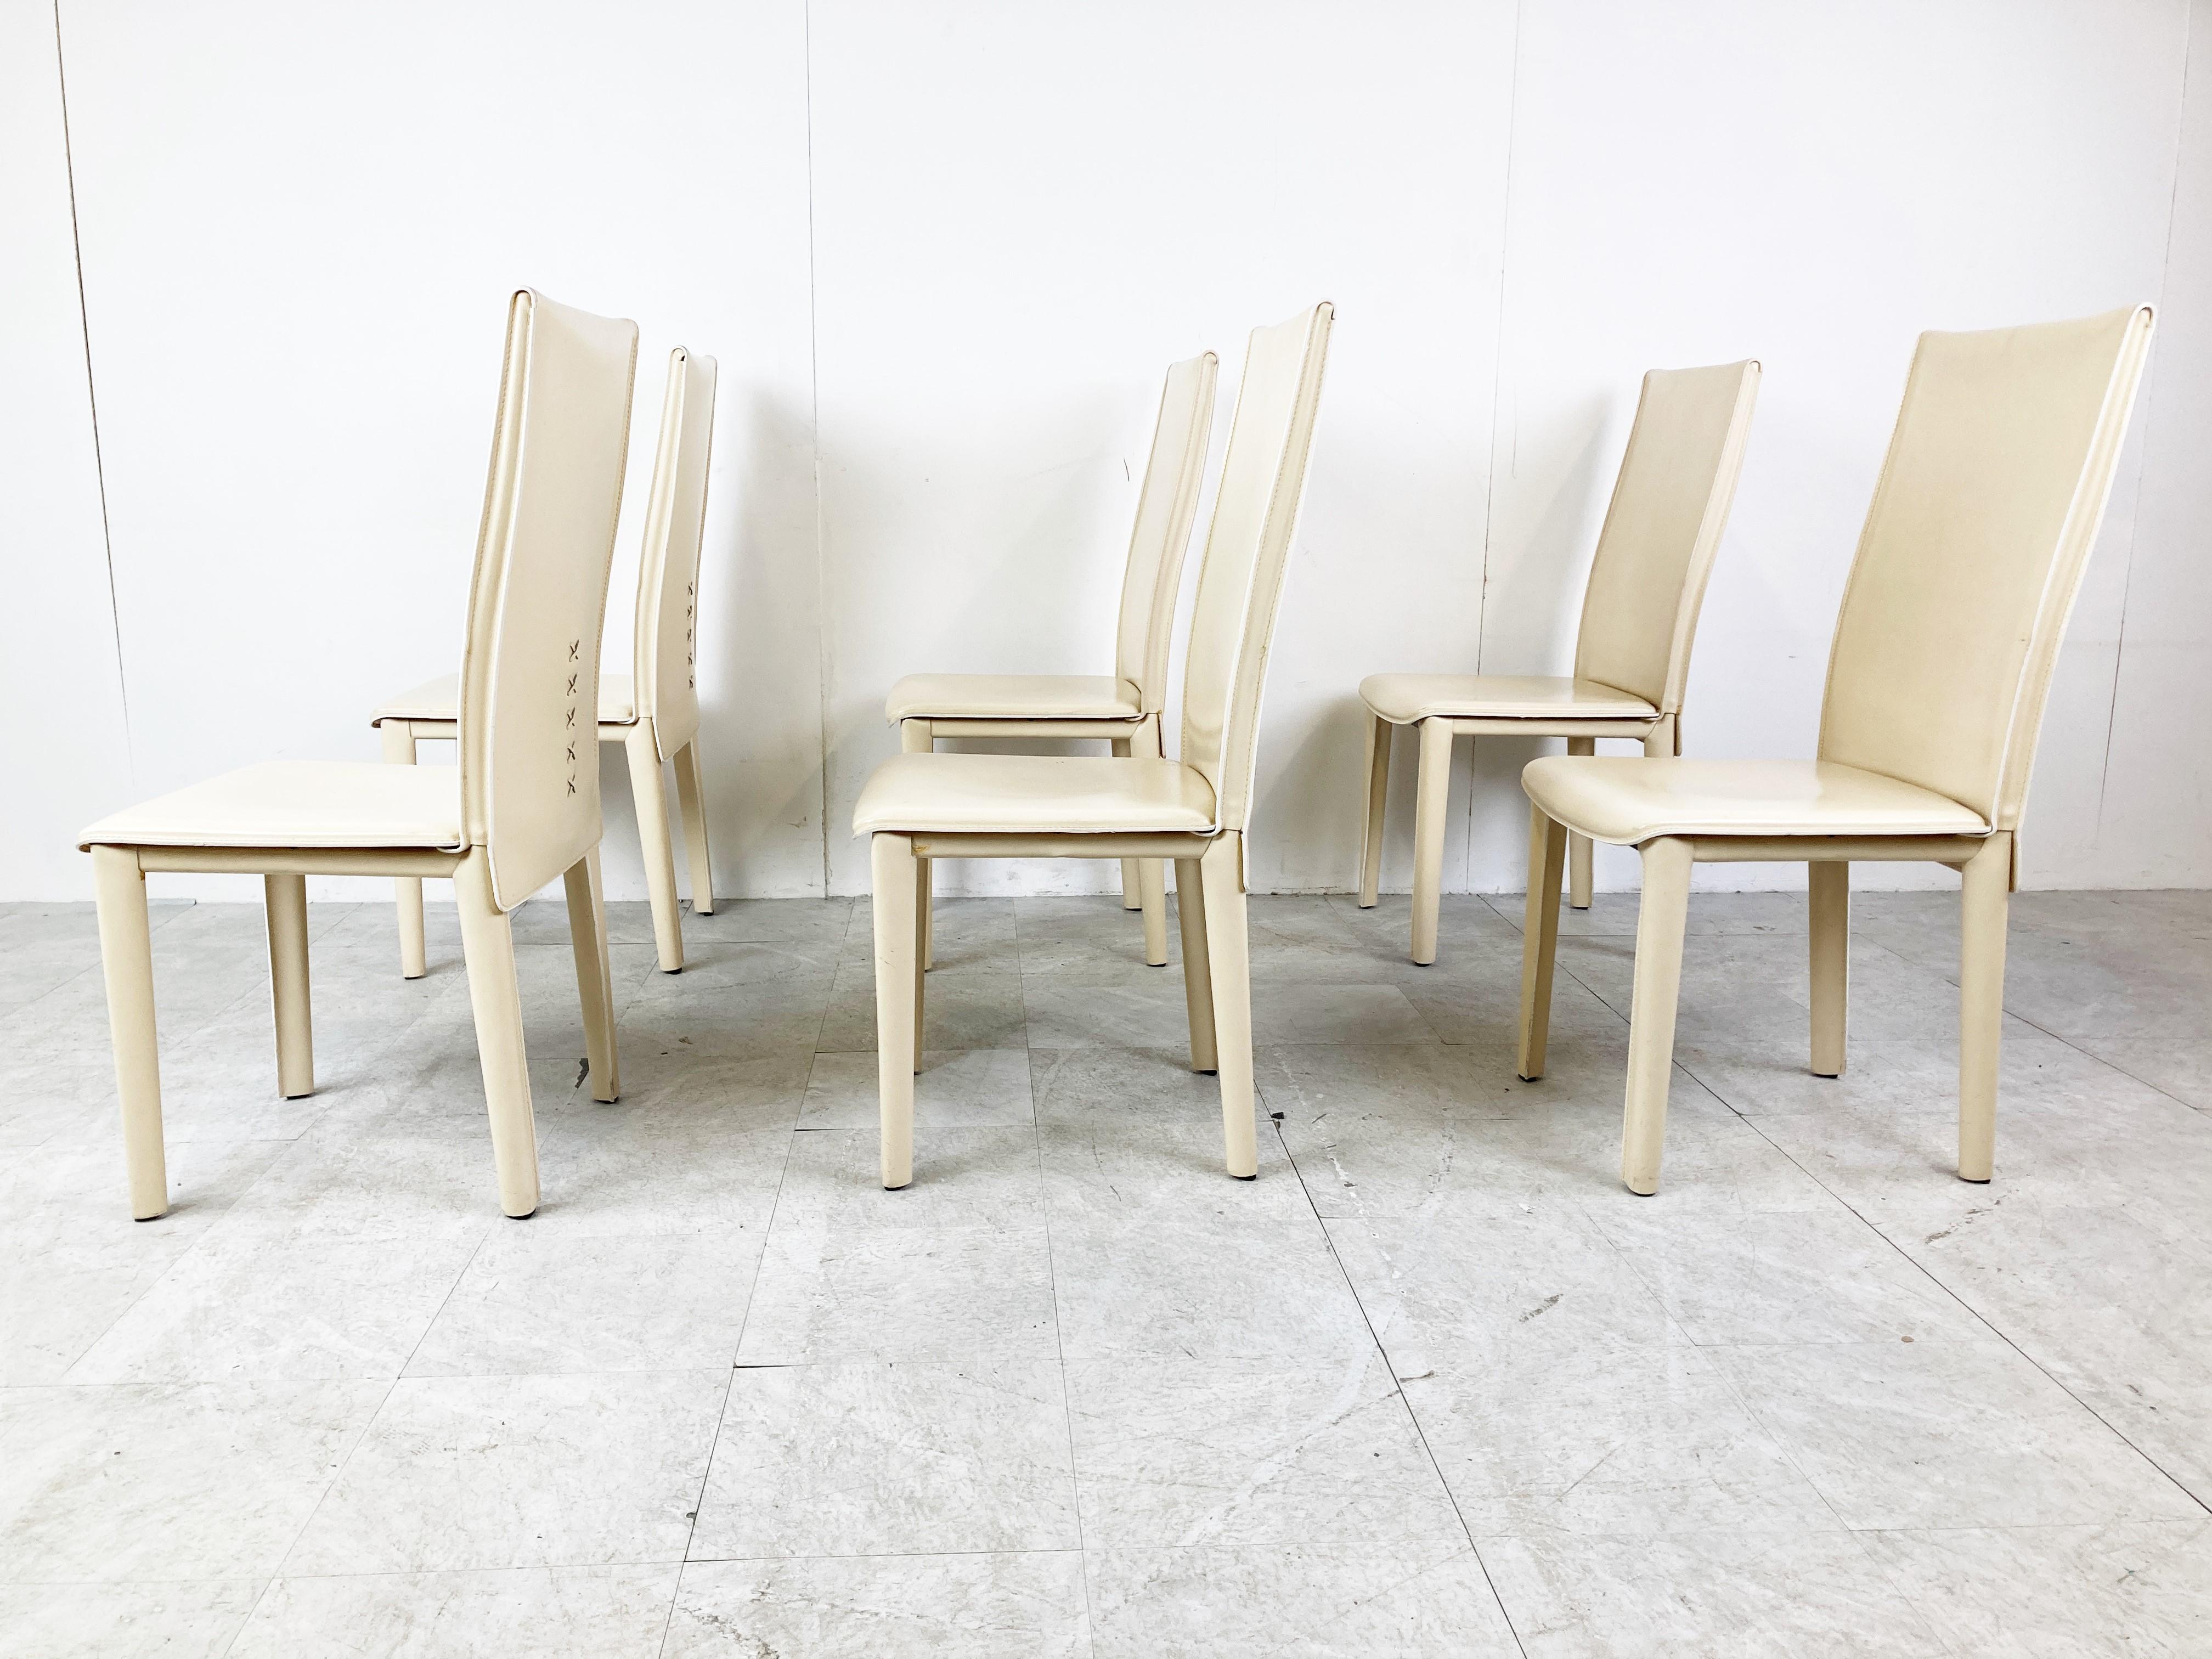 Vintage Dining Chairs by Arper Italy, 1980s For Sale 3